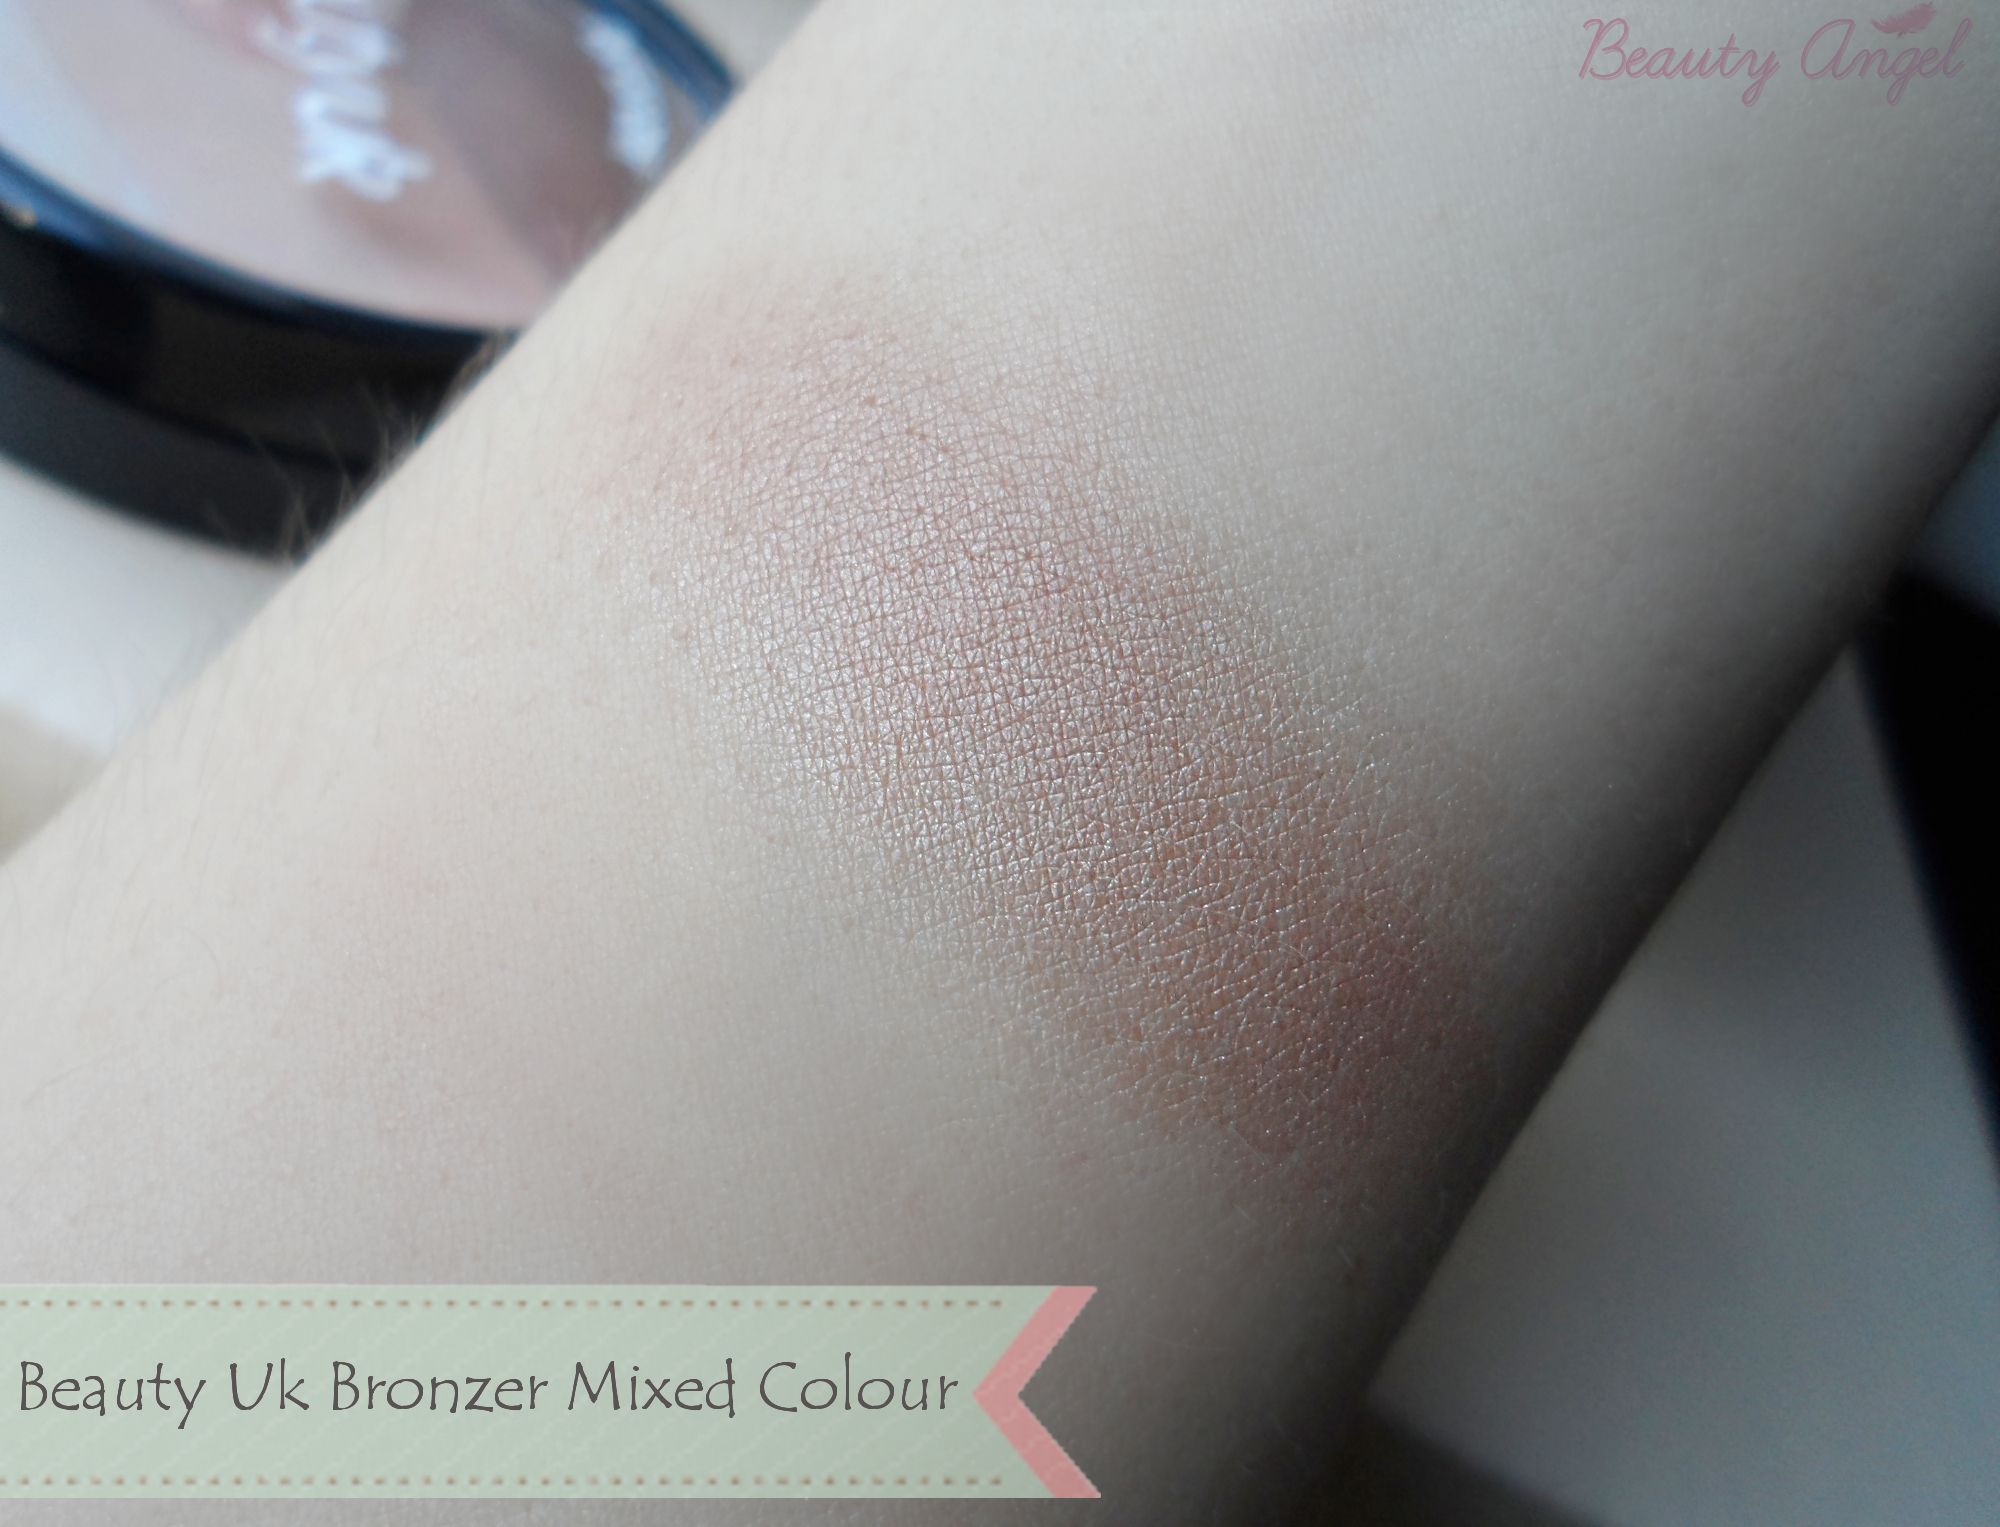 beauty uk makeup products review, swatches, and pictures by blogger